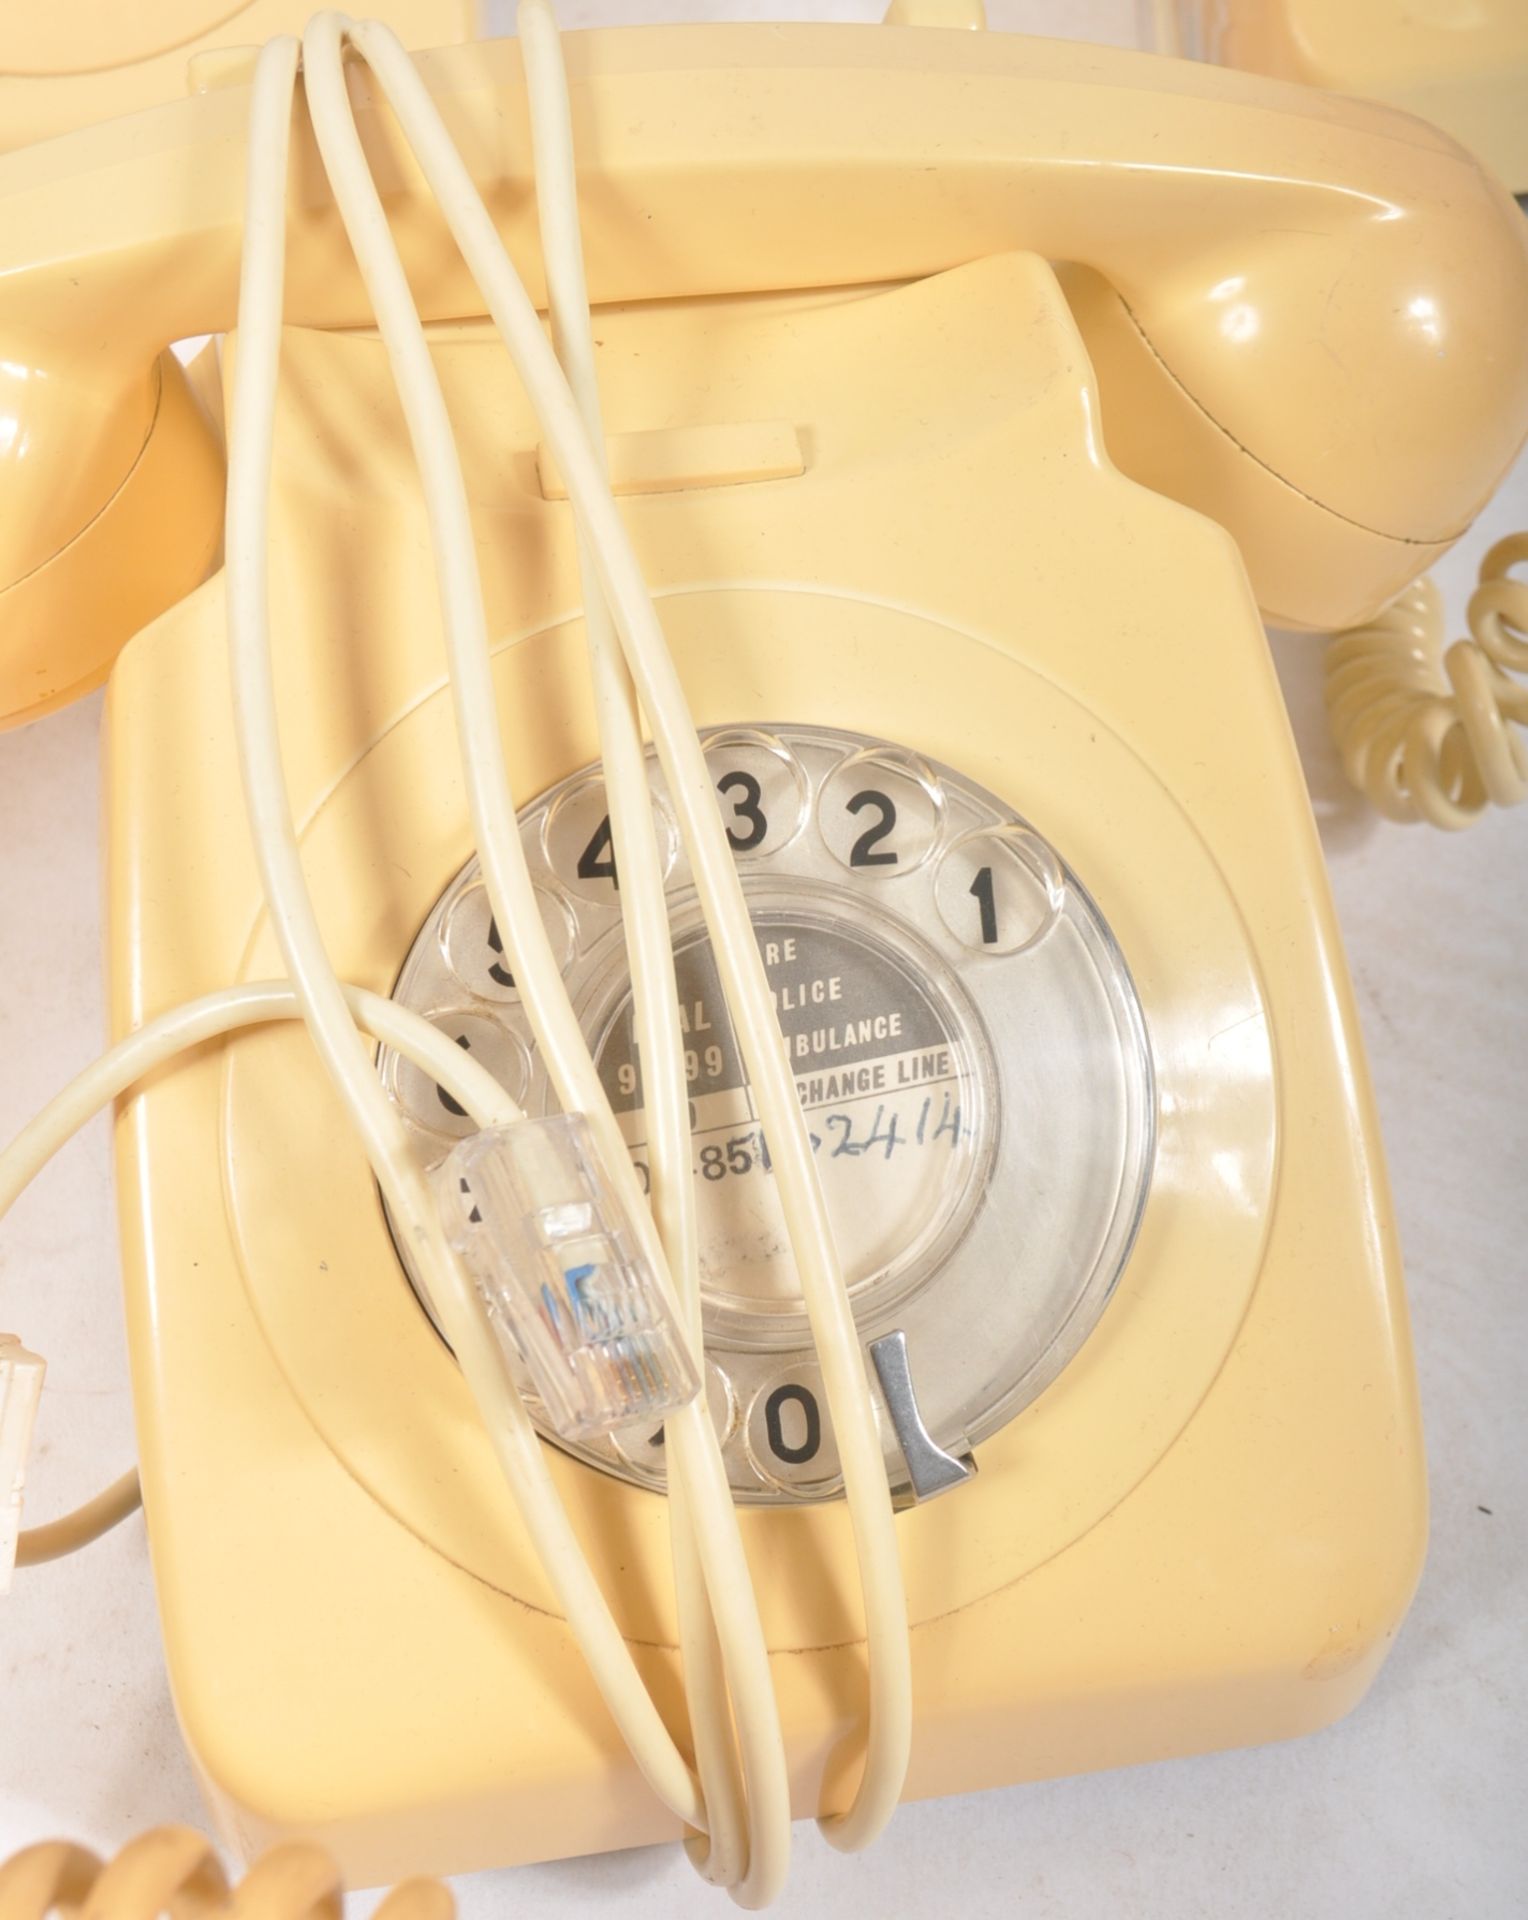 COLLECTION OF ELEVEN VINTAGE 1970S ROTARY DIAL GPO TELEPHONES - Image 3 of 5